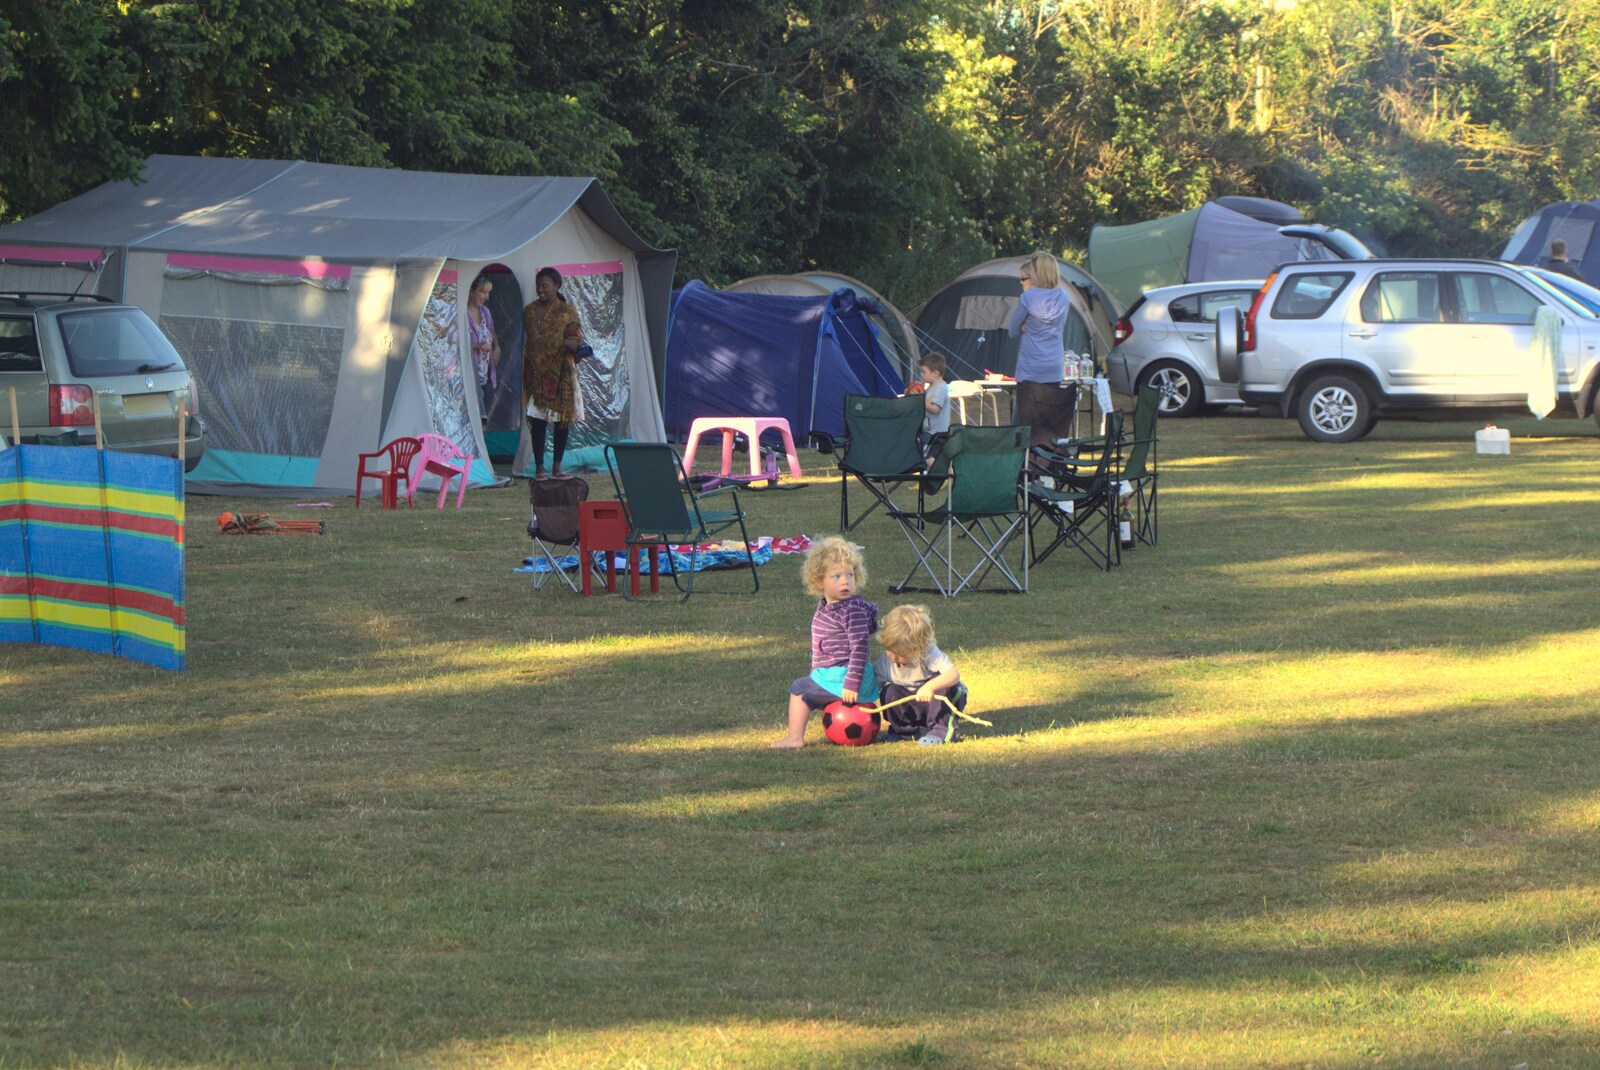 Rosie and Fred in the middle of the campsite from Carlton Park Camping, Saxmundham, Suffolk - 4th June 2011